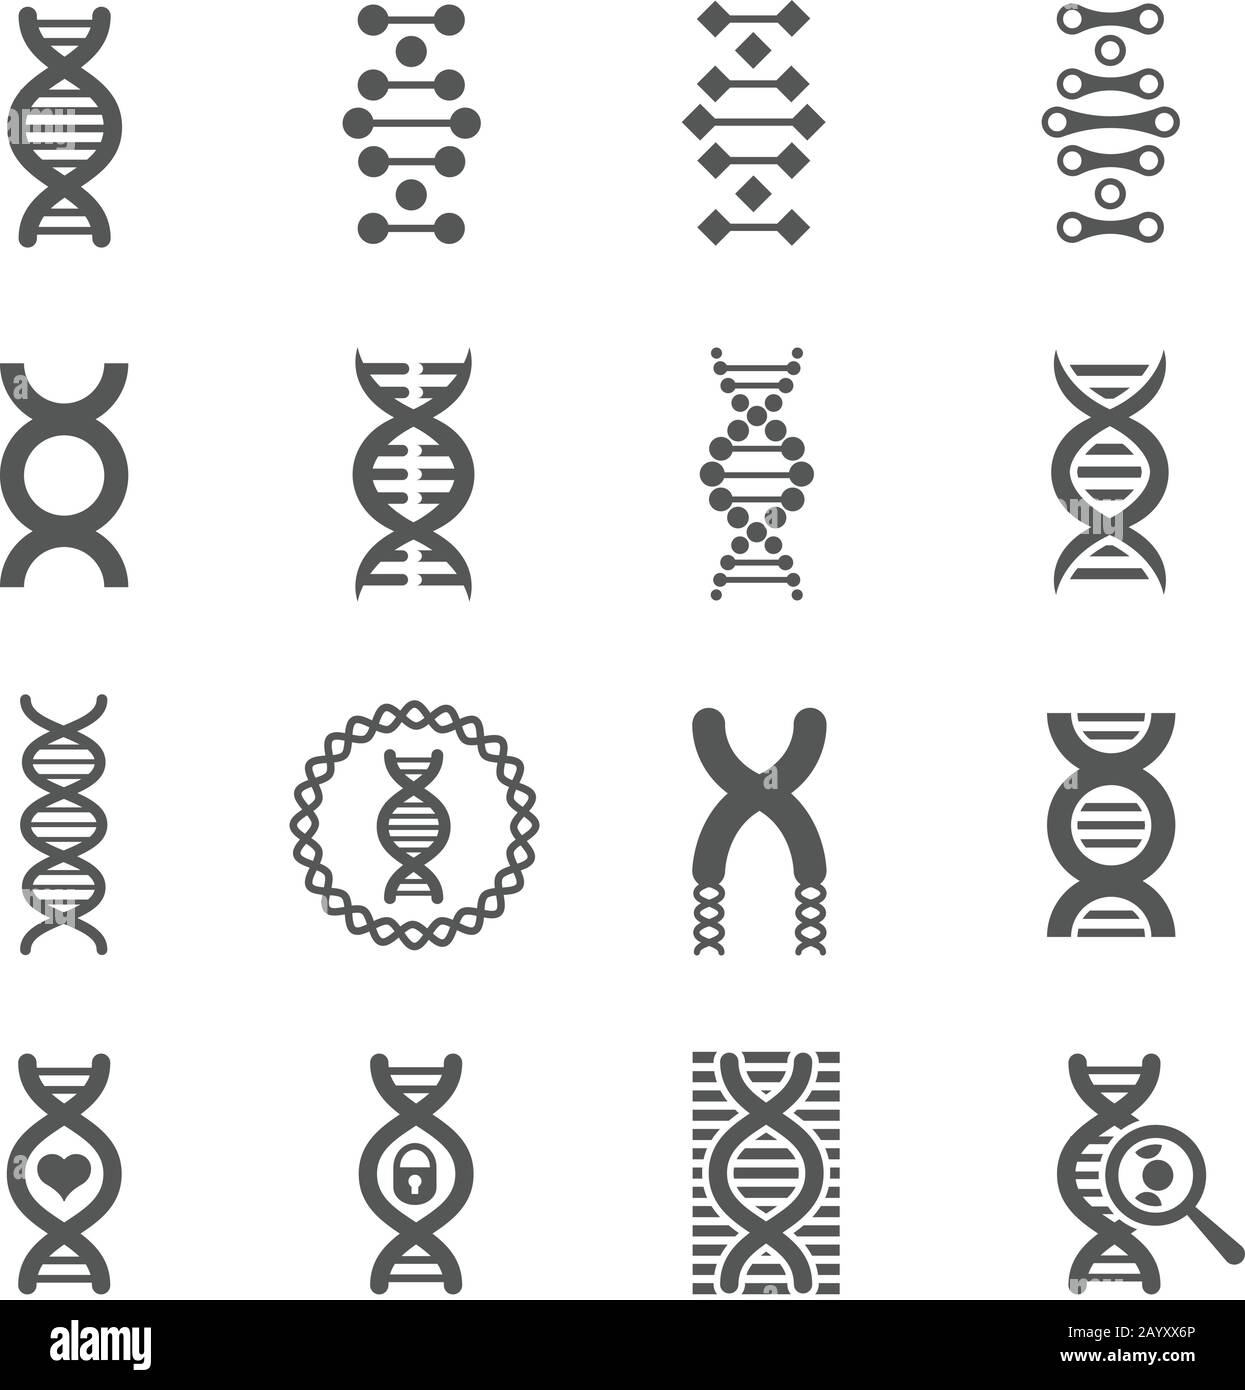 DNA spiral vector black icons. Biology genetic signs and dna molecule symbols for chemistry or biology Stock Vector